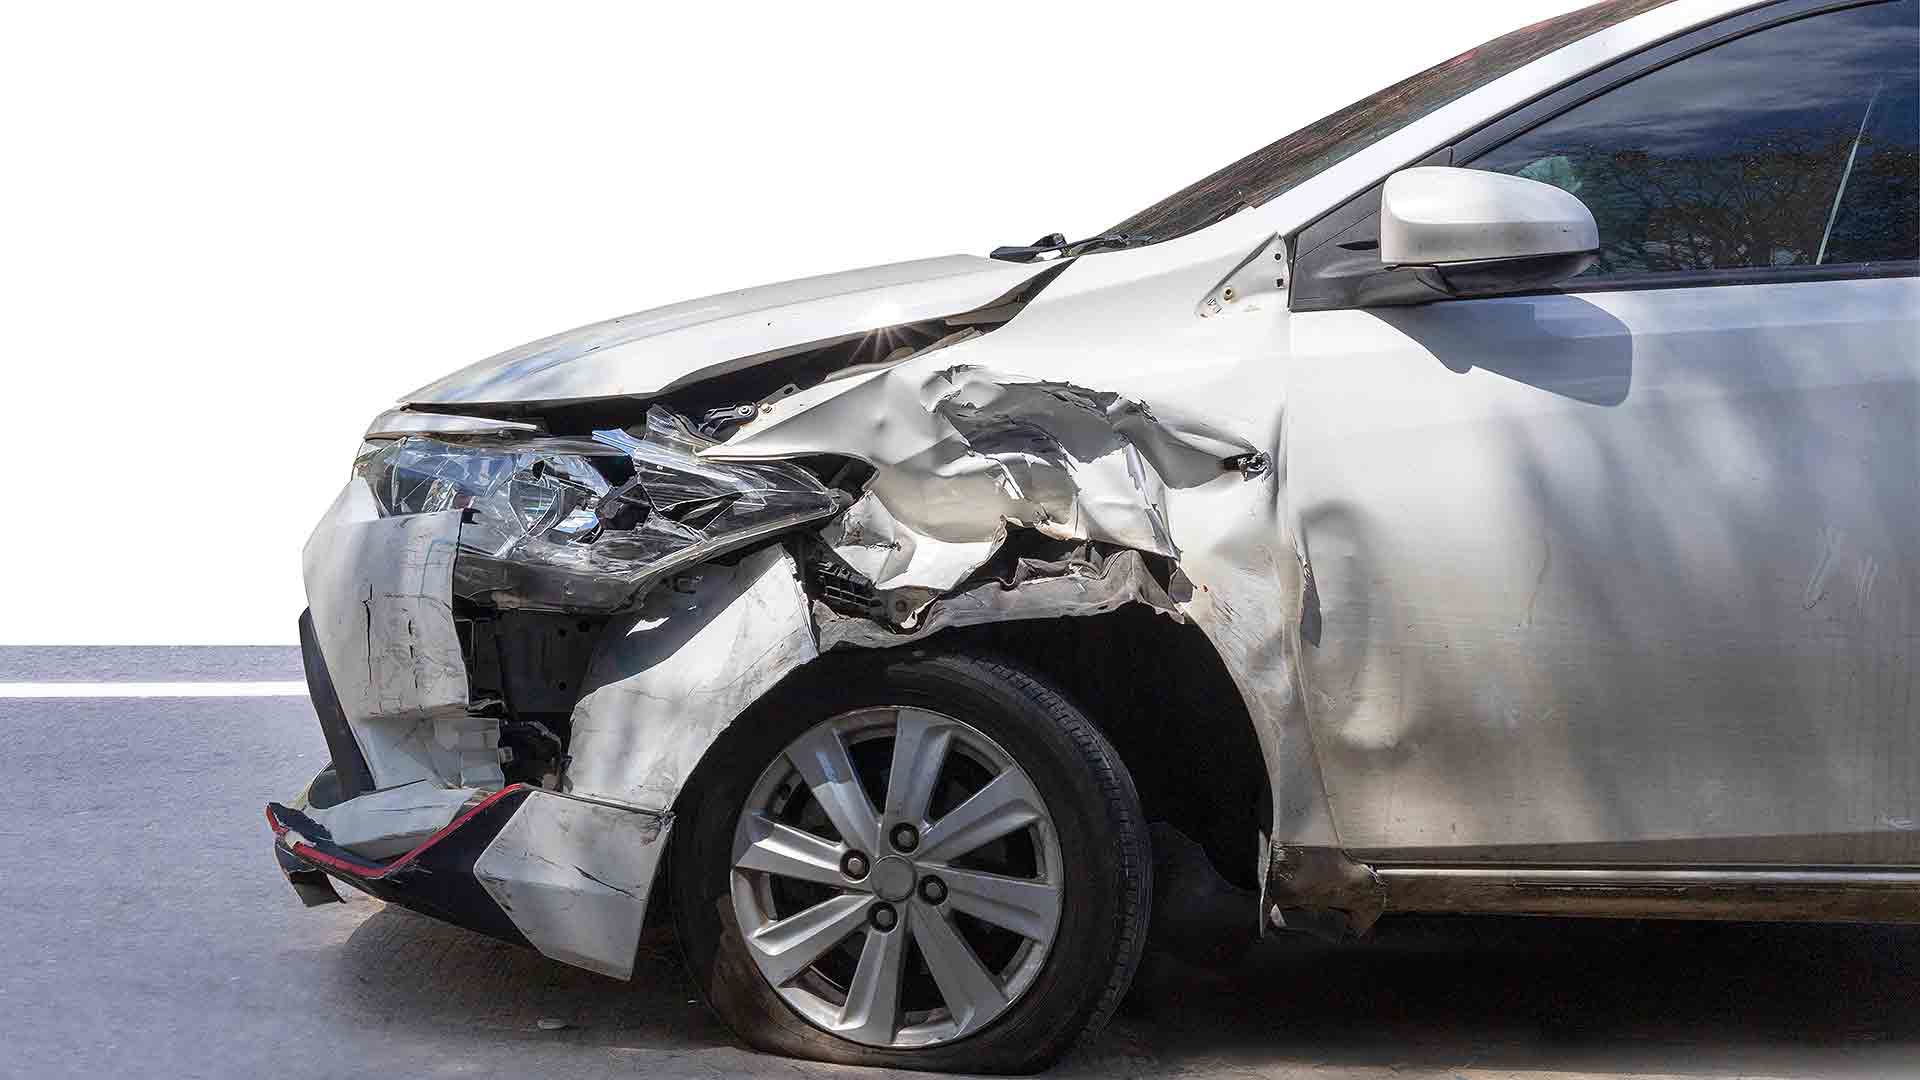 Salvage car prices jump by a THIRD due to Covid